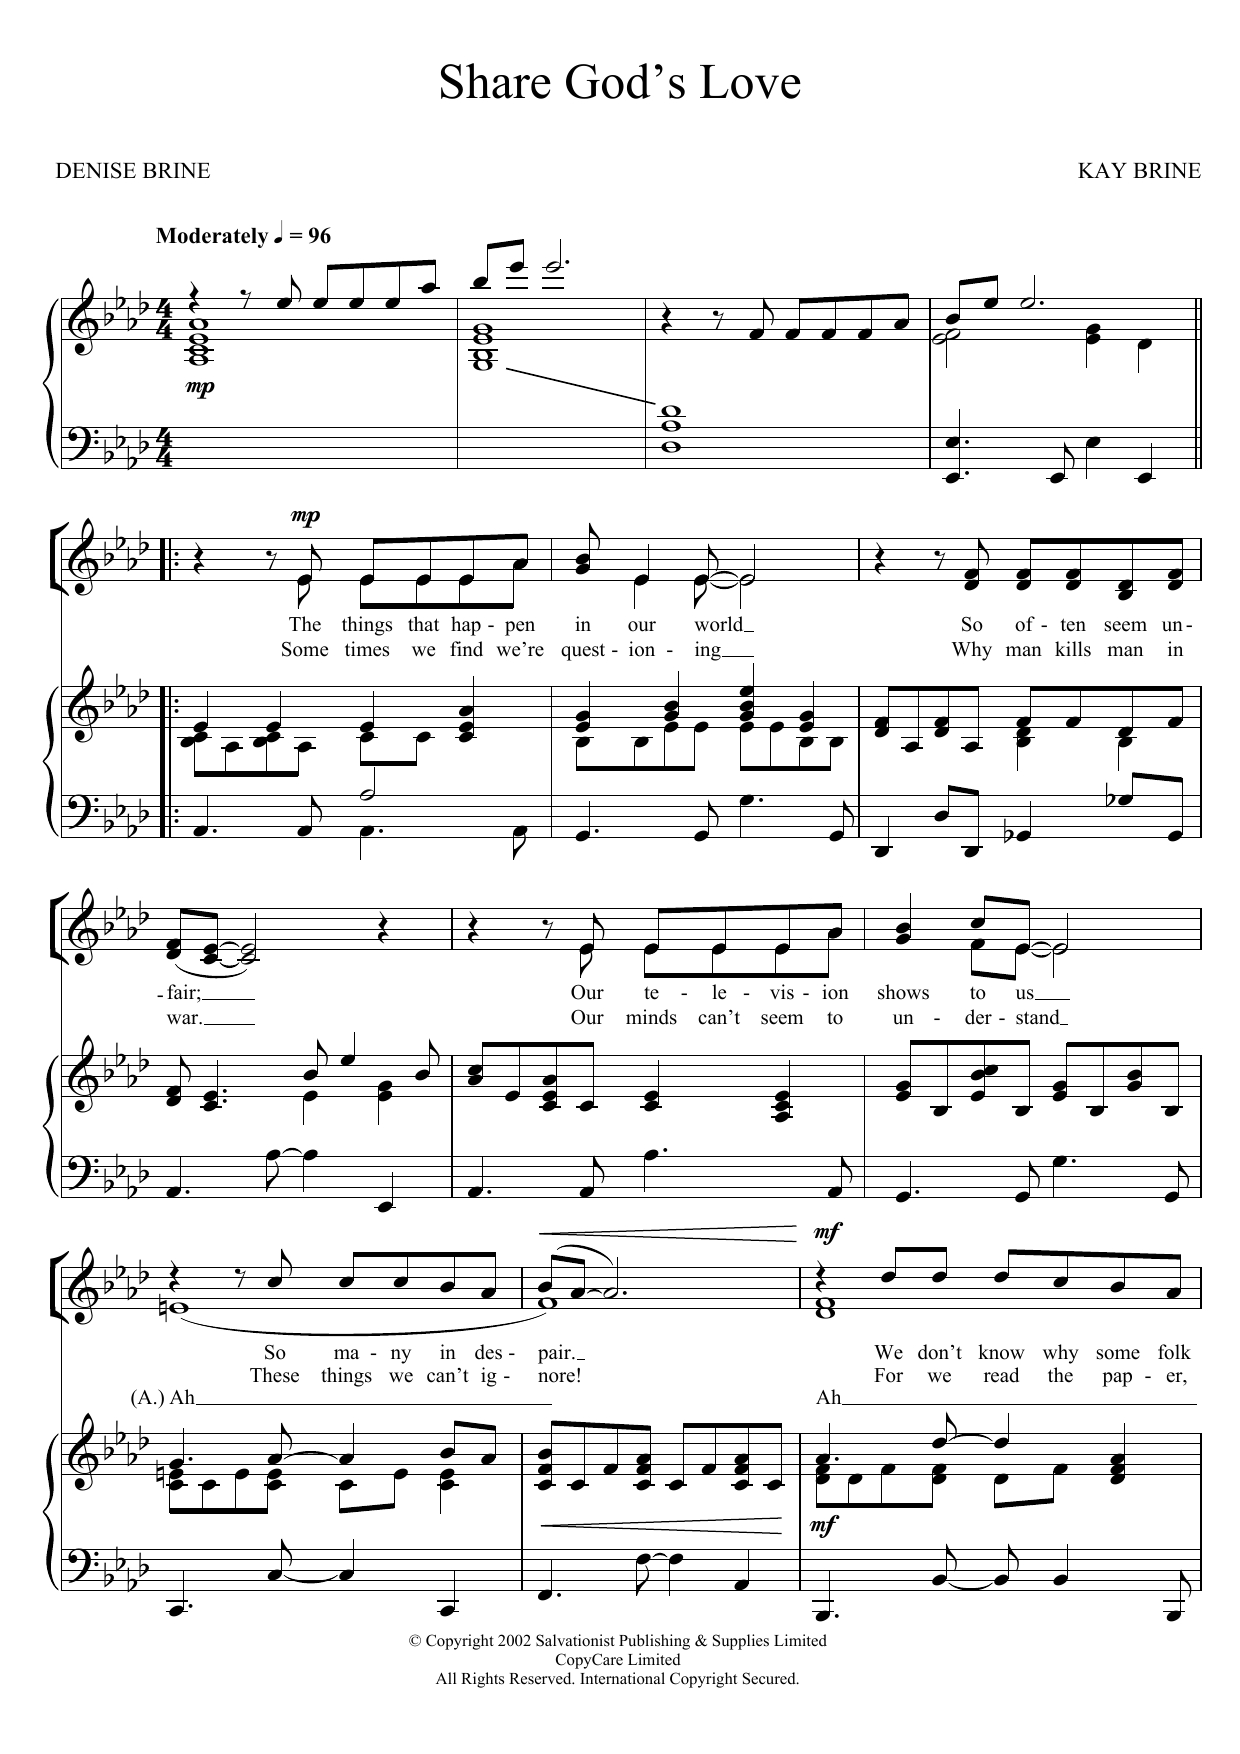 Download The Salvation Army Share God's Love Sheet Music